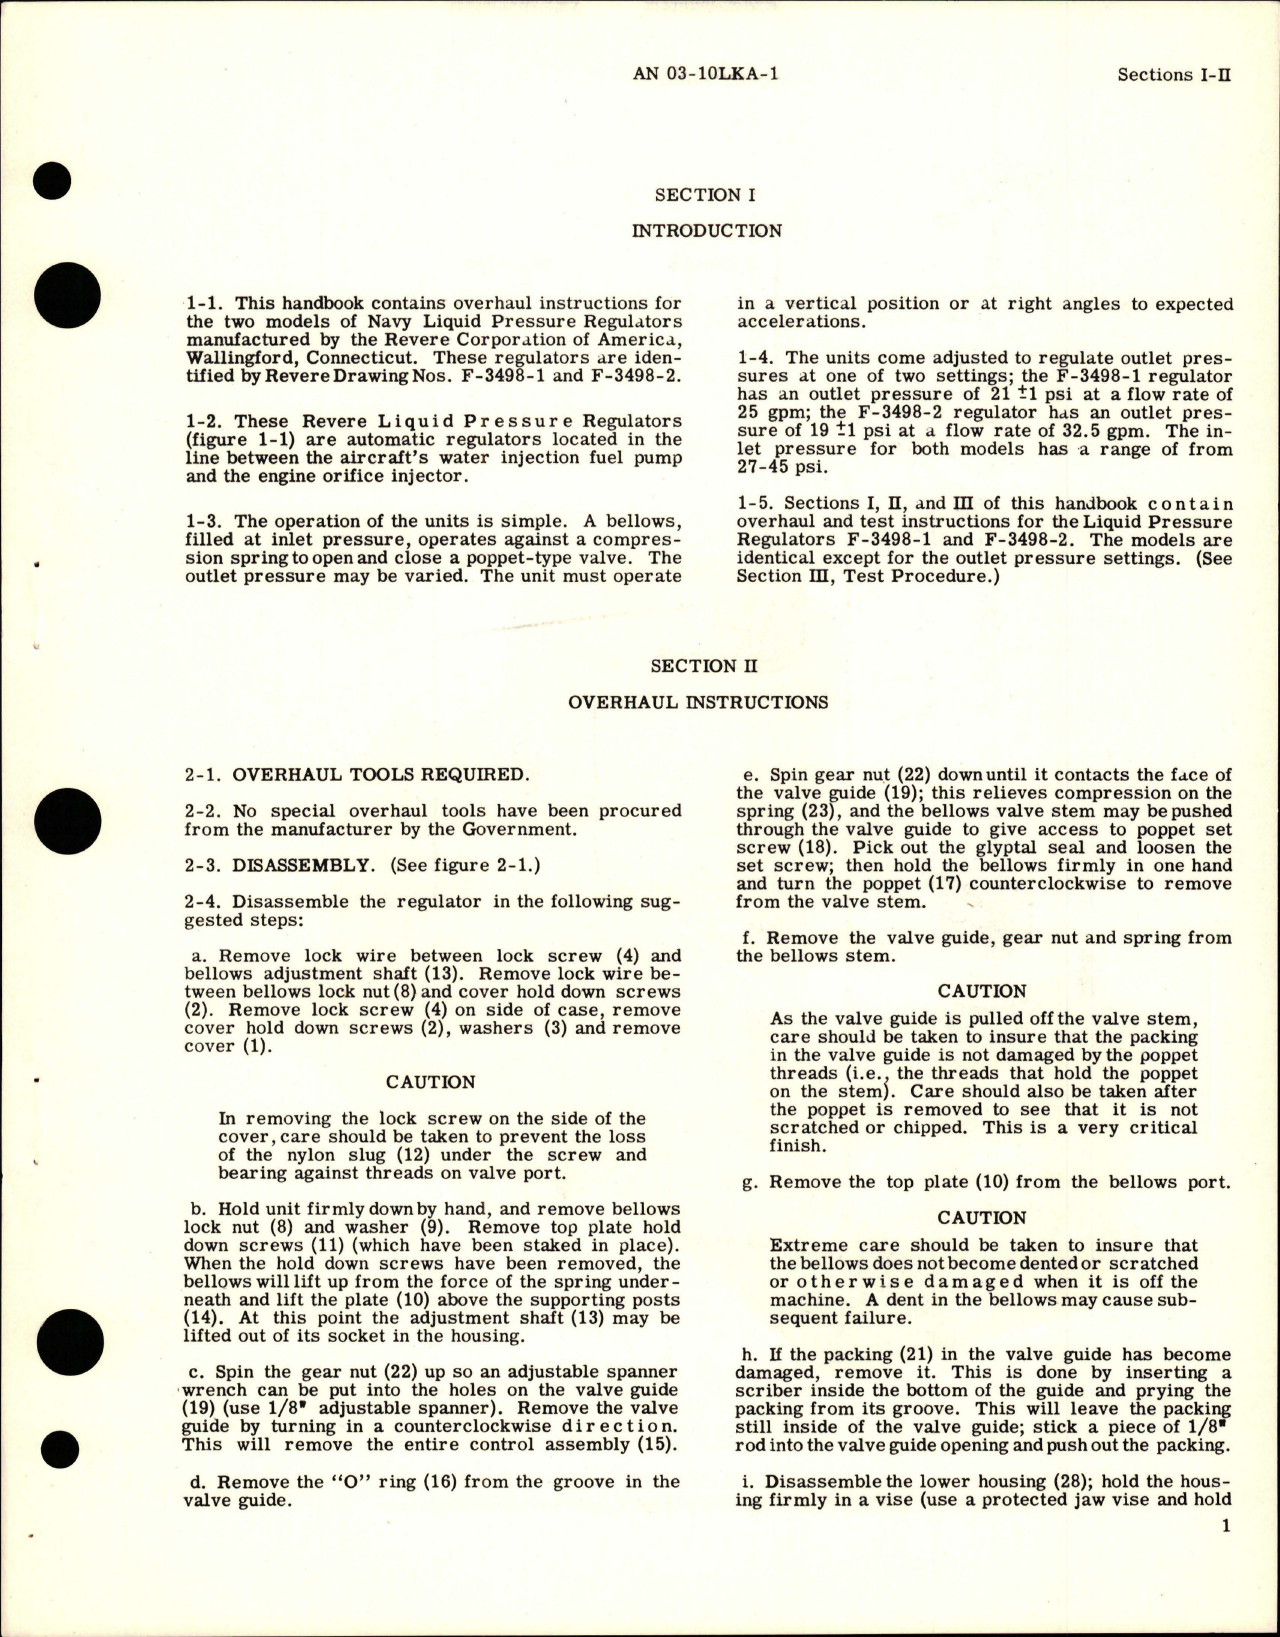 Sample page 5 from AirCorps Library document: Overhaul Instructions for Liquid Pressure Regulators - Models F-3498-1 and F3498-2